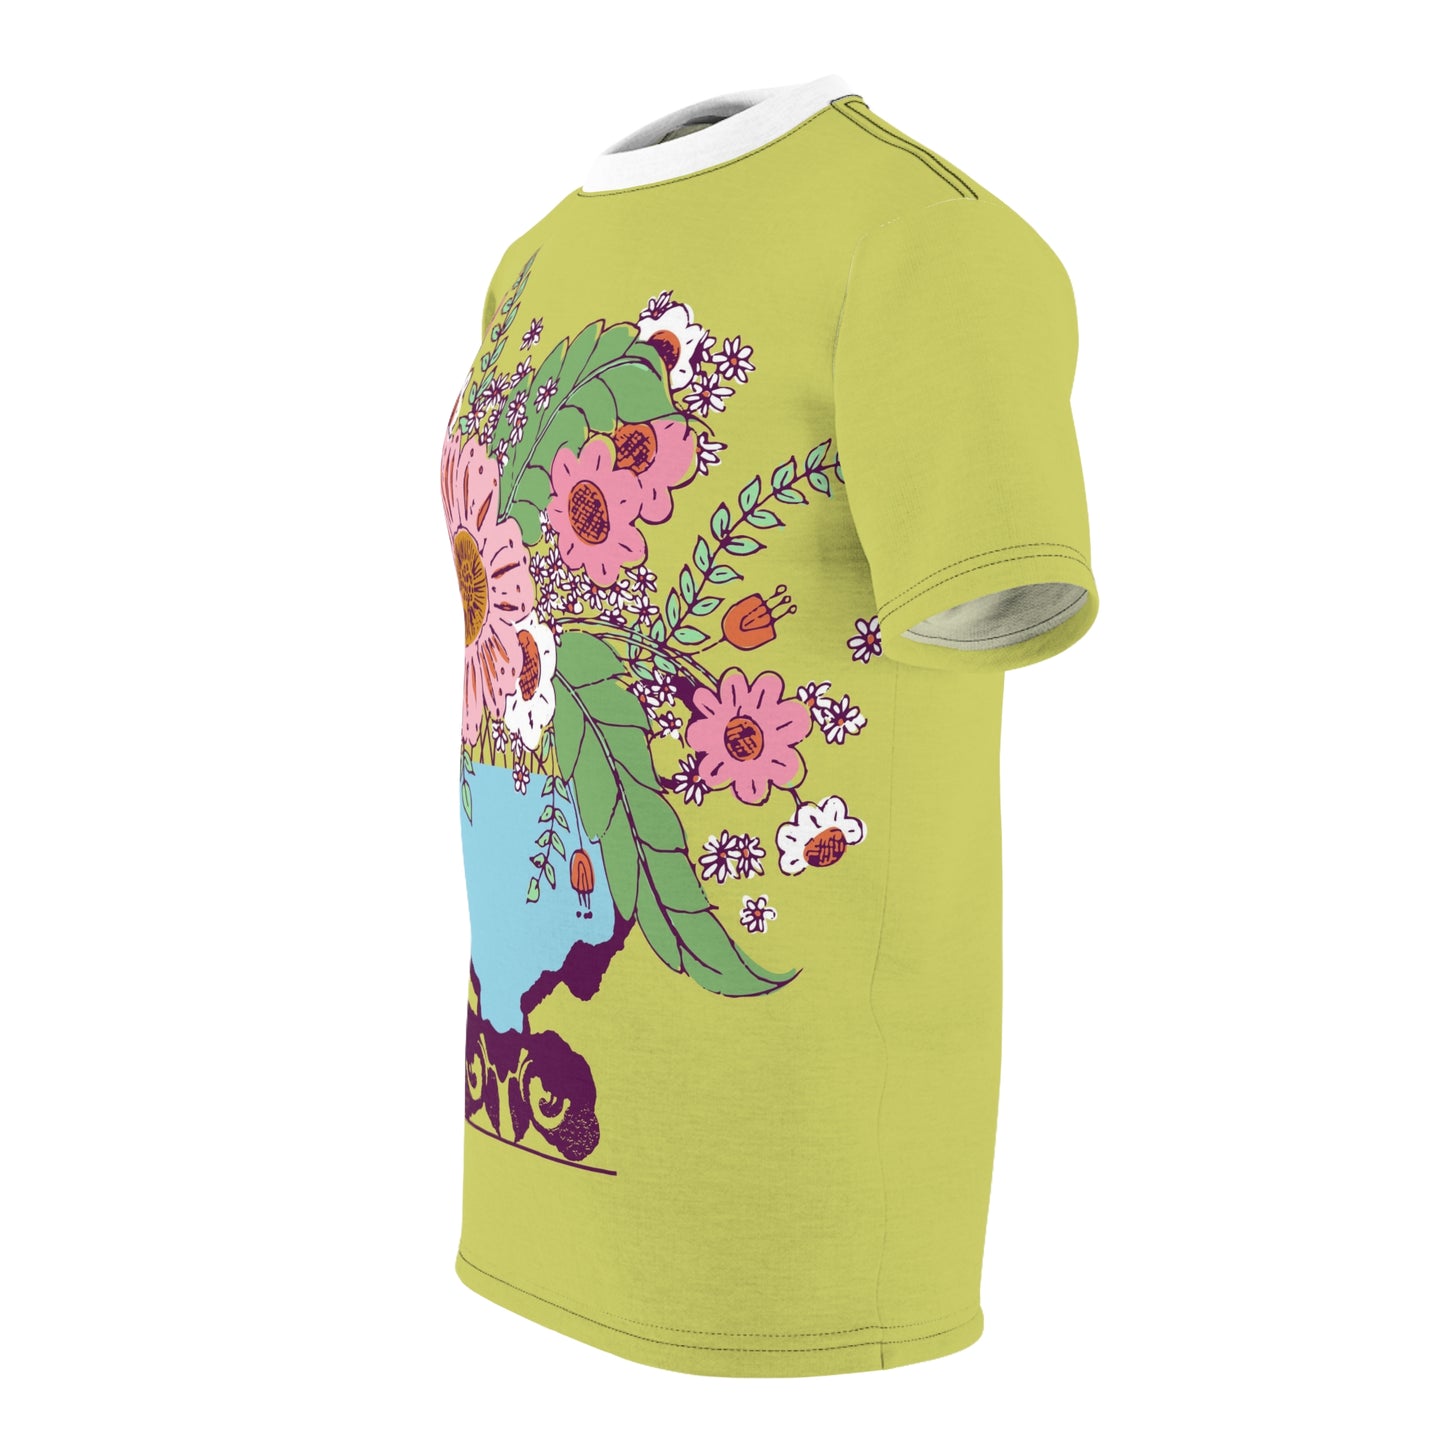 Cheerful Watercolor Flowers in Vase on Bright Green Tee